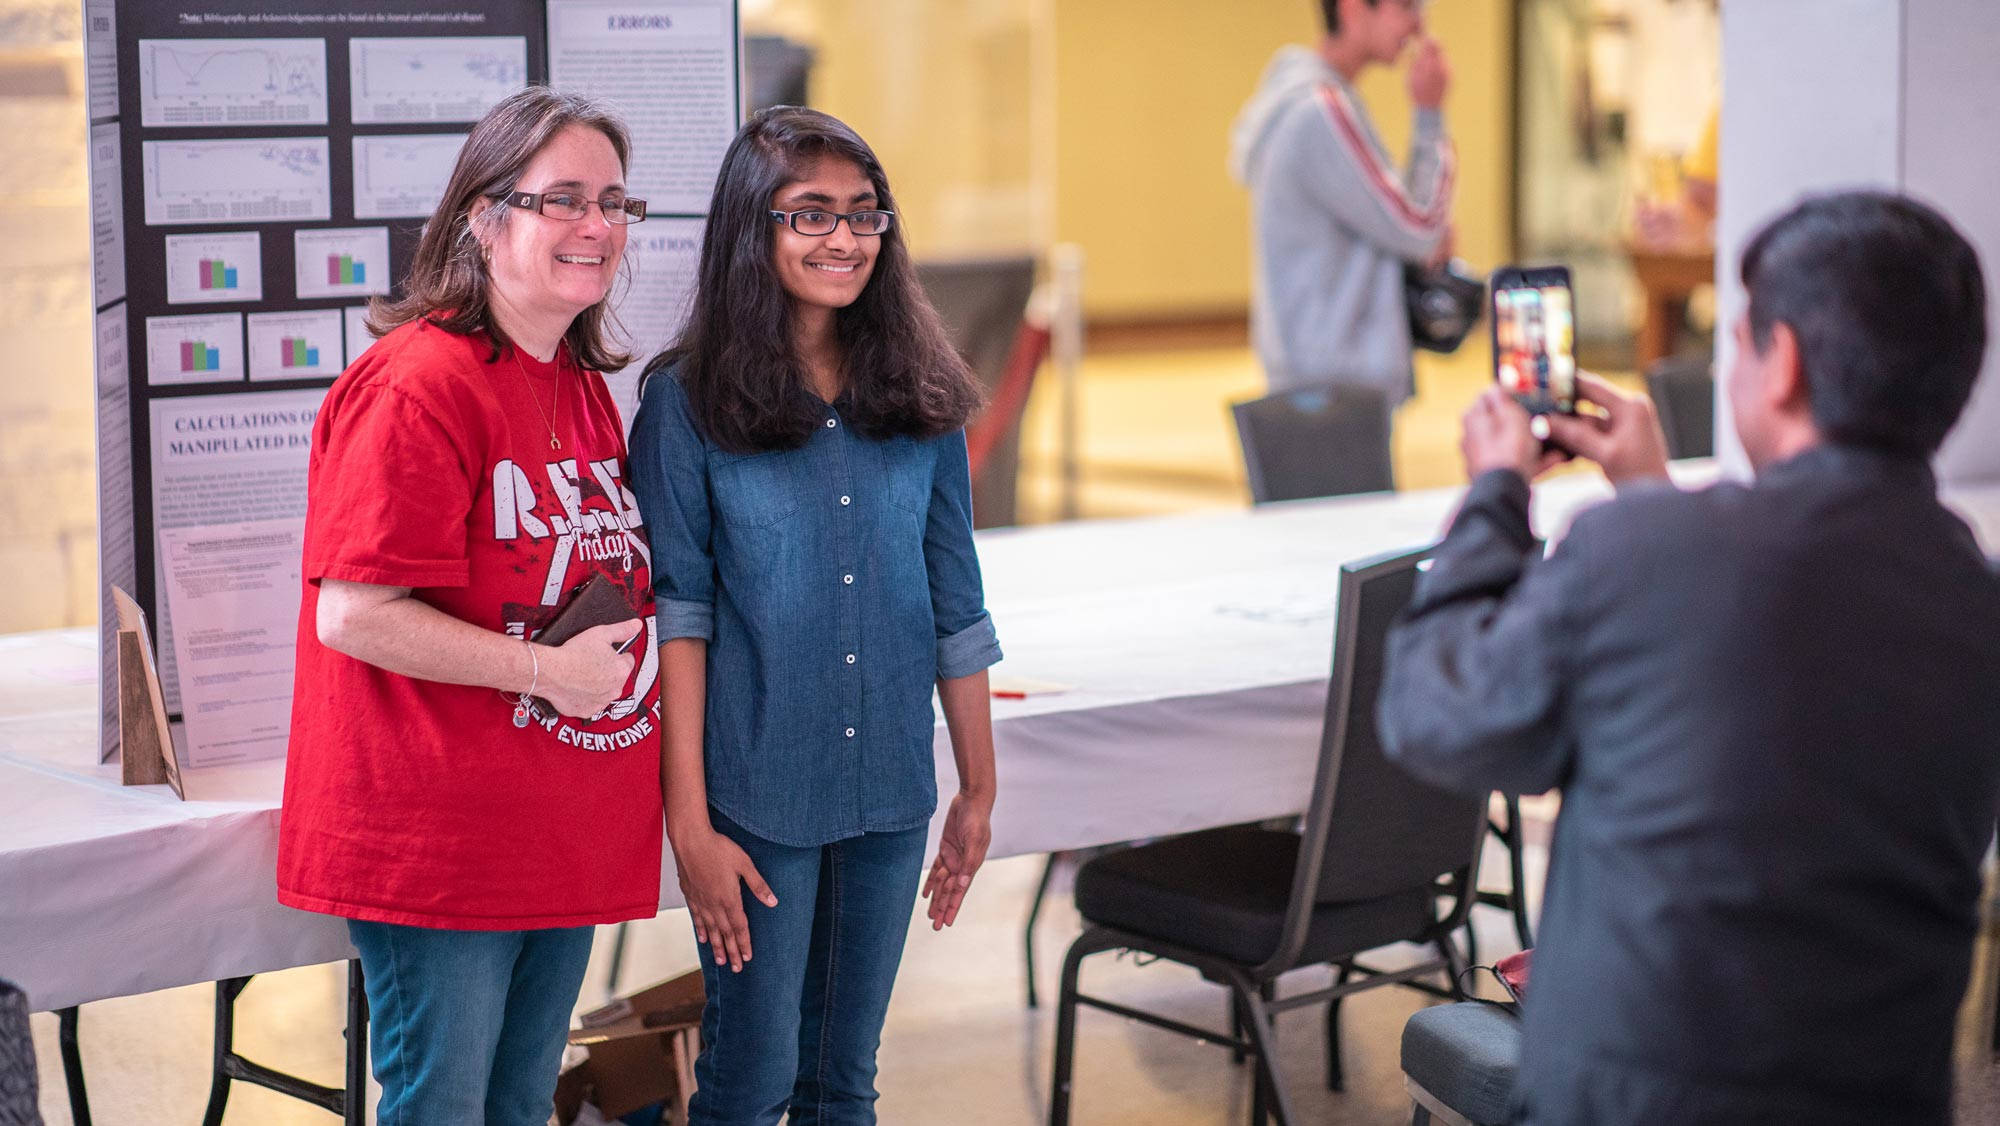 A young girl and boy, both with brown hair, kneel on the ground as they work on a poster as the 2019 Texas Science and Engineering Fair.